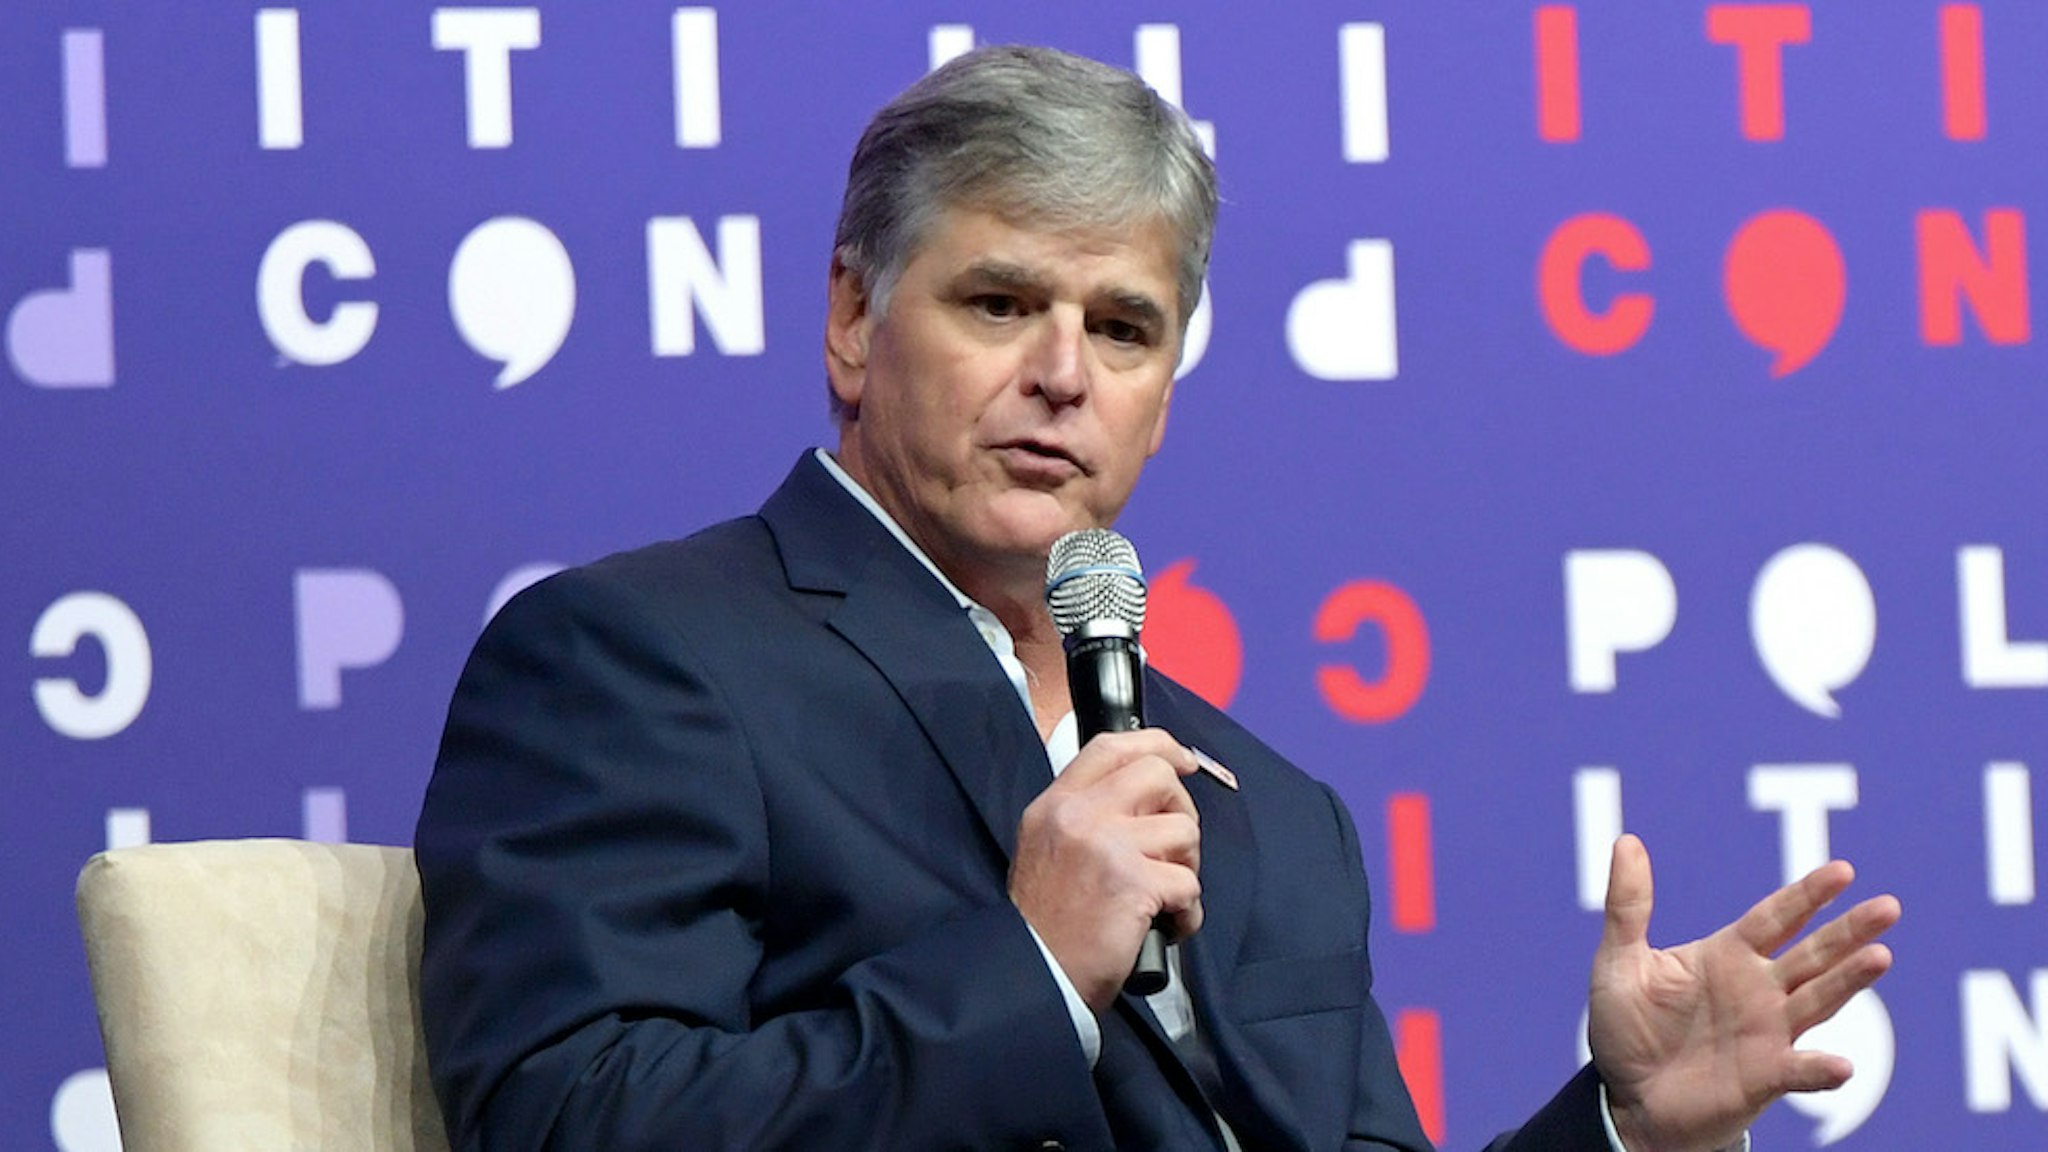 Sean Hannity speaks onstage during the 2019 Politicon at Music City Center on October 26, 2019 in Nashville, Tennessee. (Photo by Jason Kempin/Getty Images for Politicon )